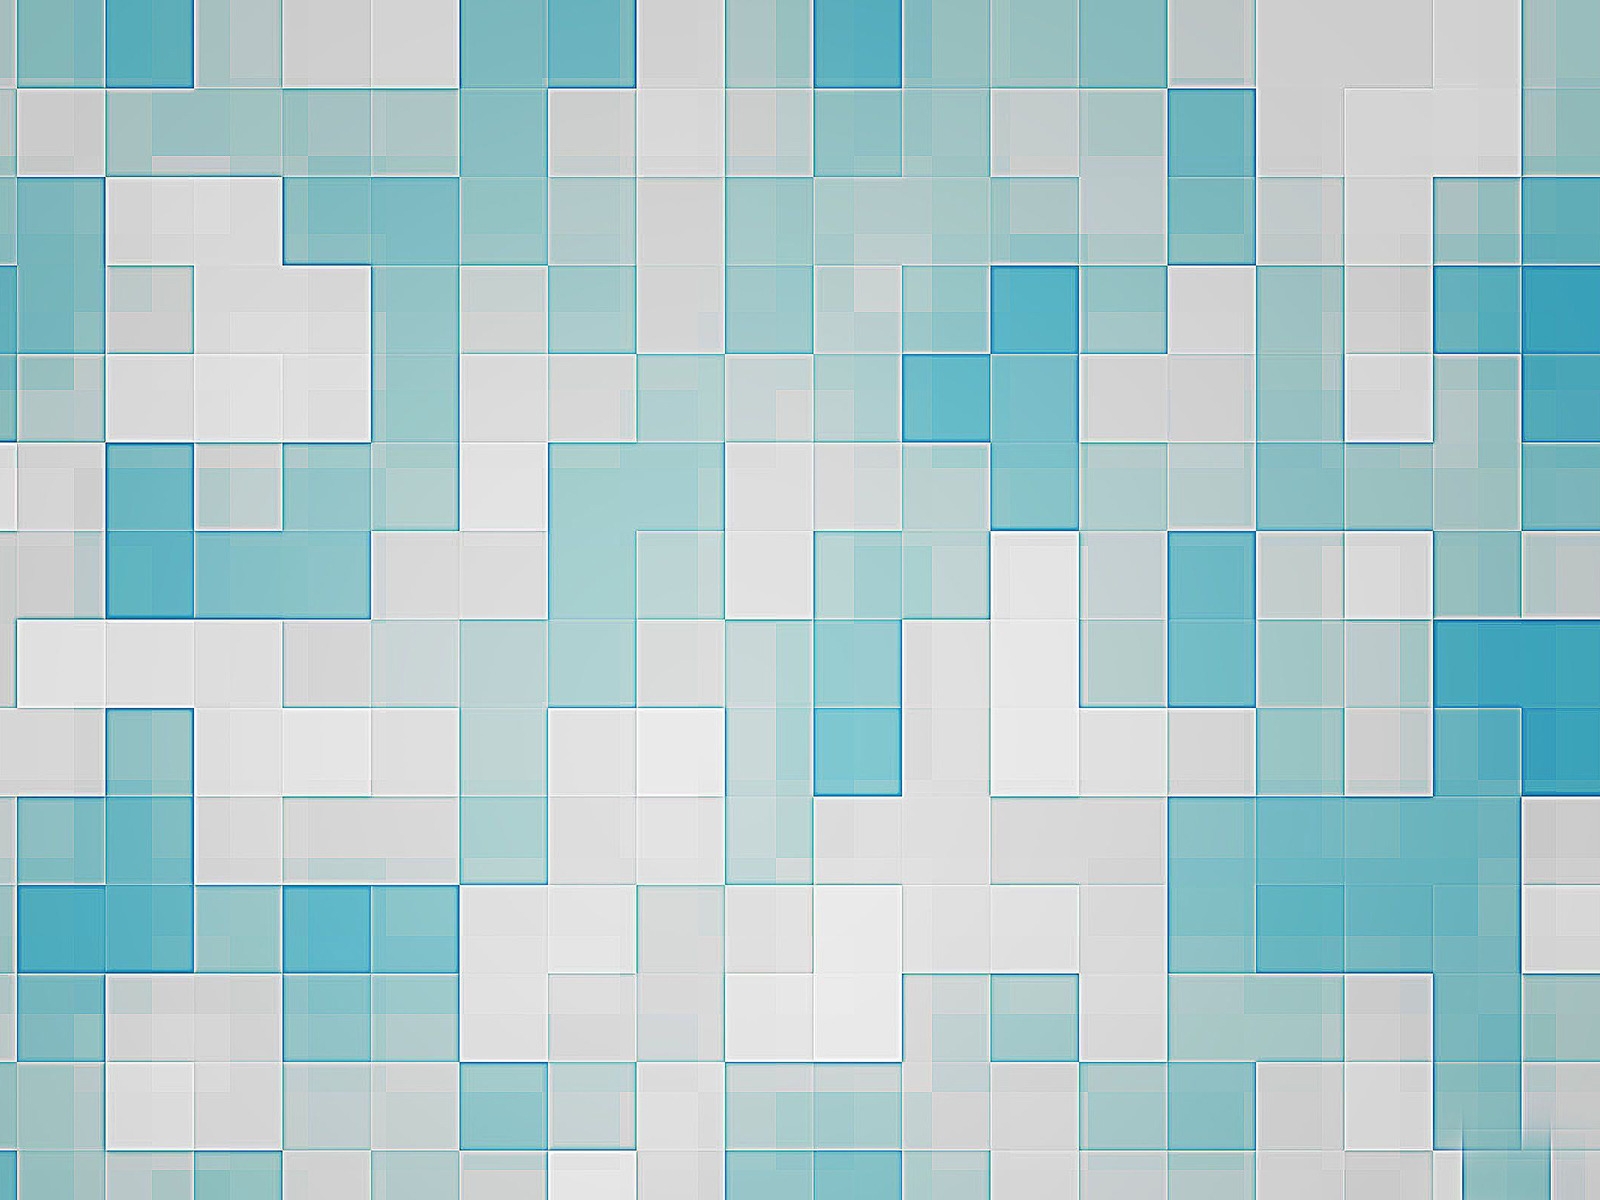 Turquoise Mosaic for 1600 x 1200 resolution